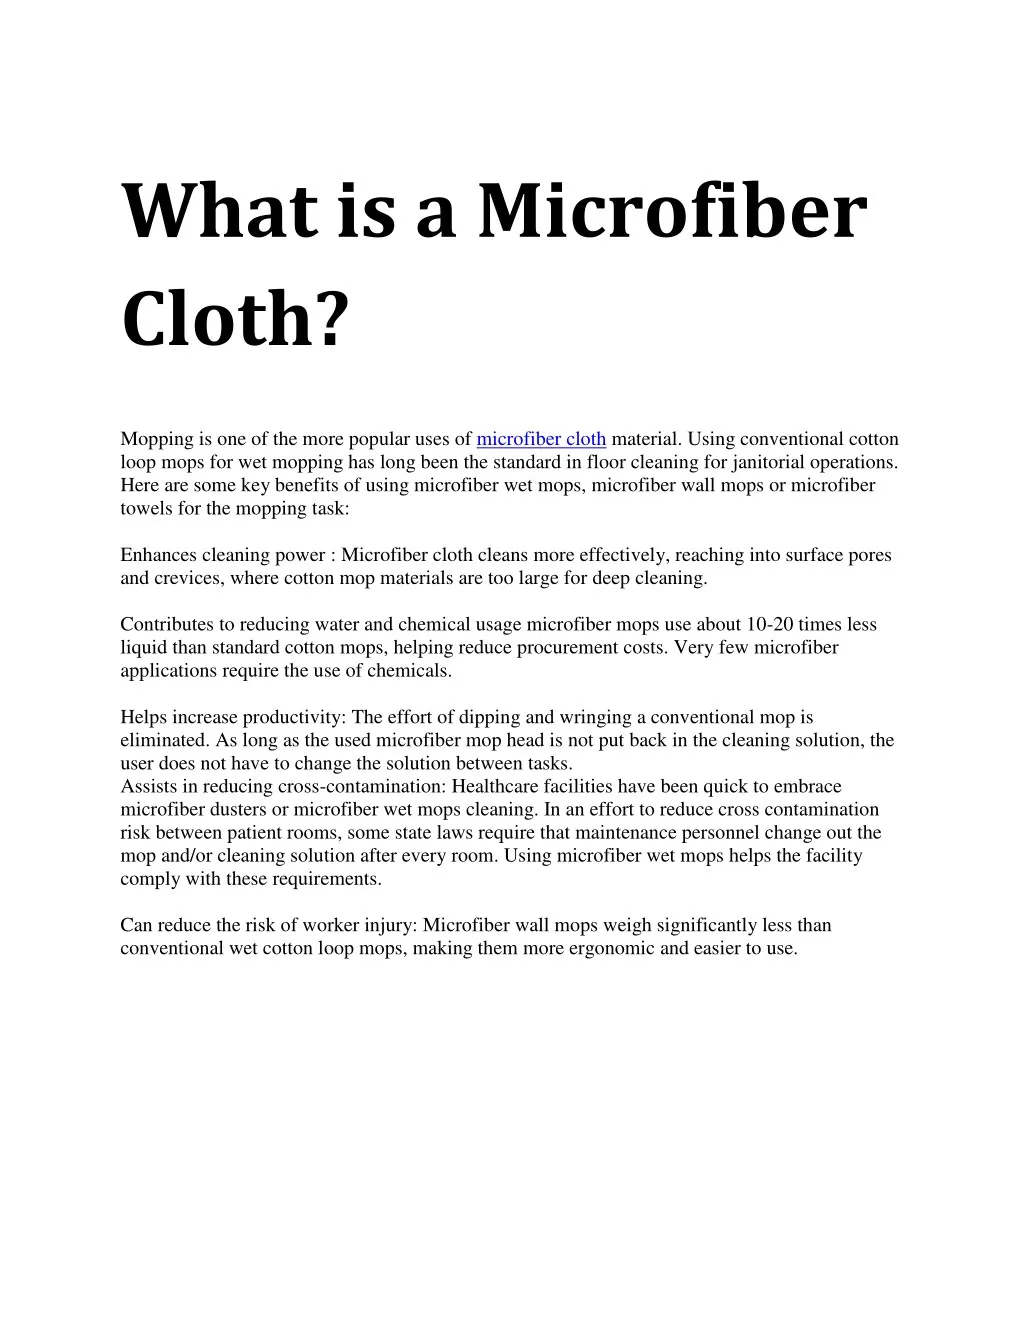 what is a microfiber cloth